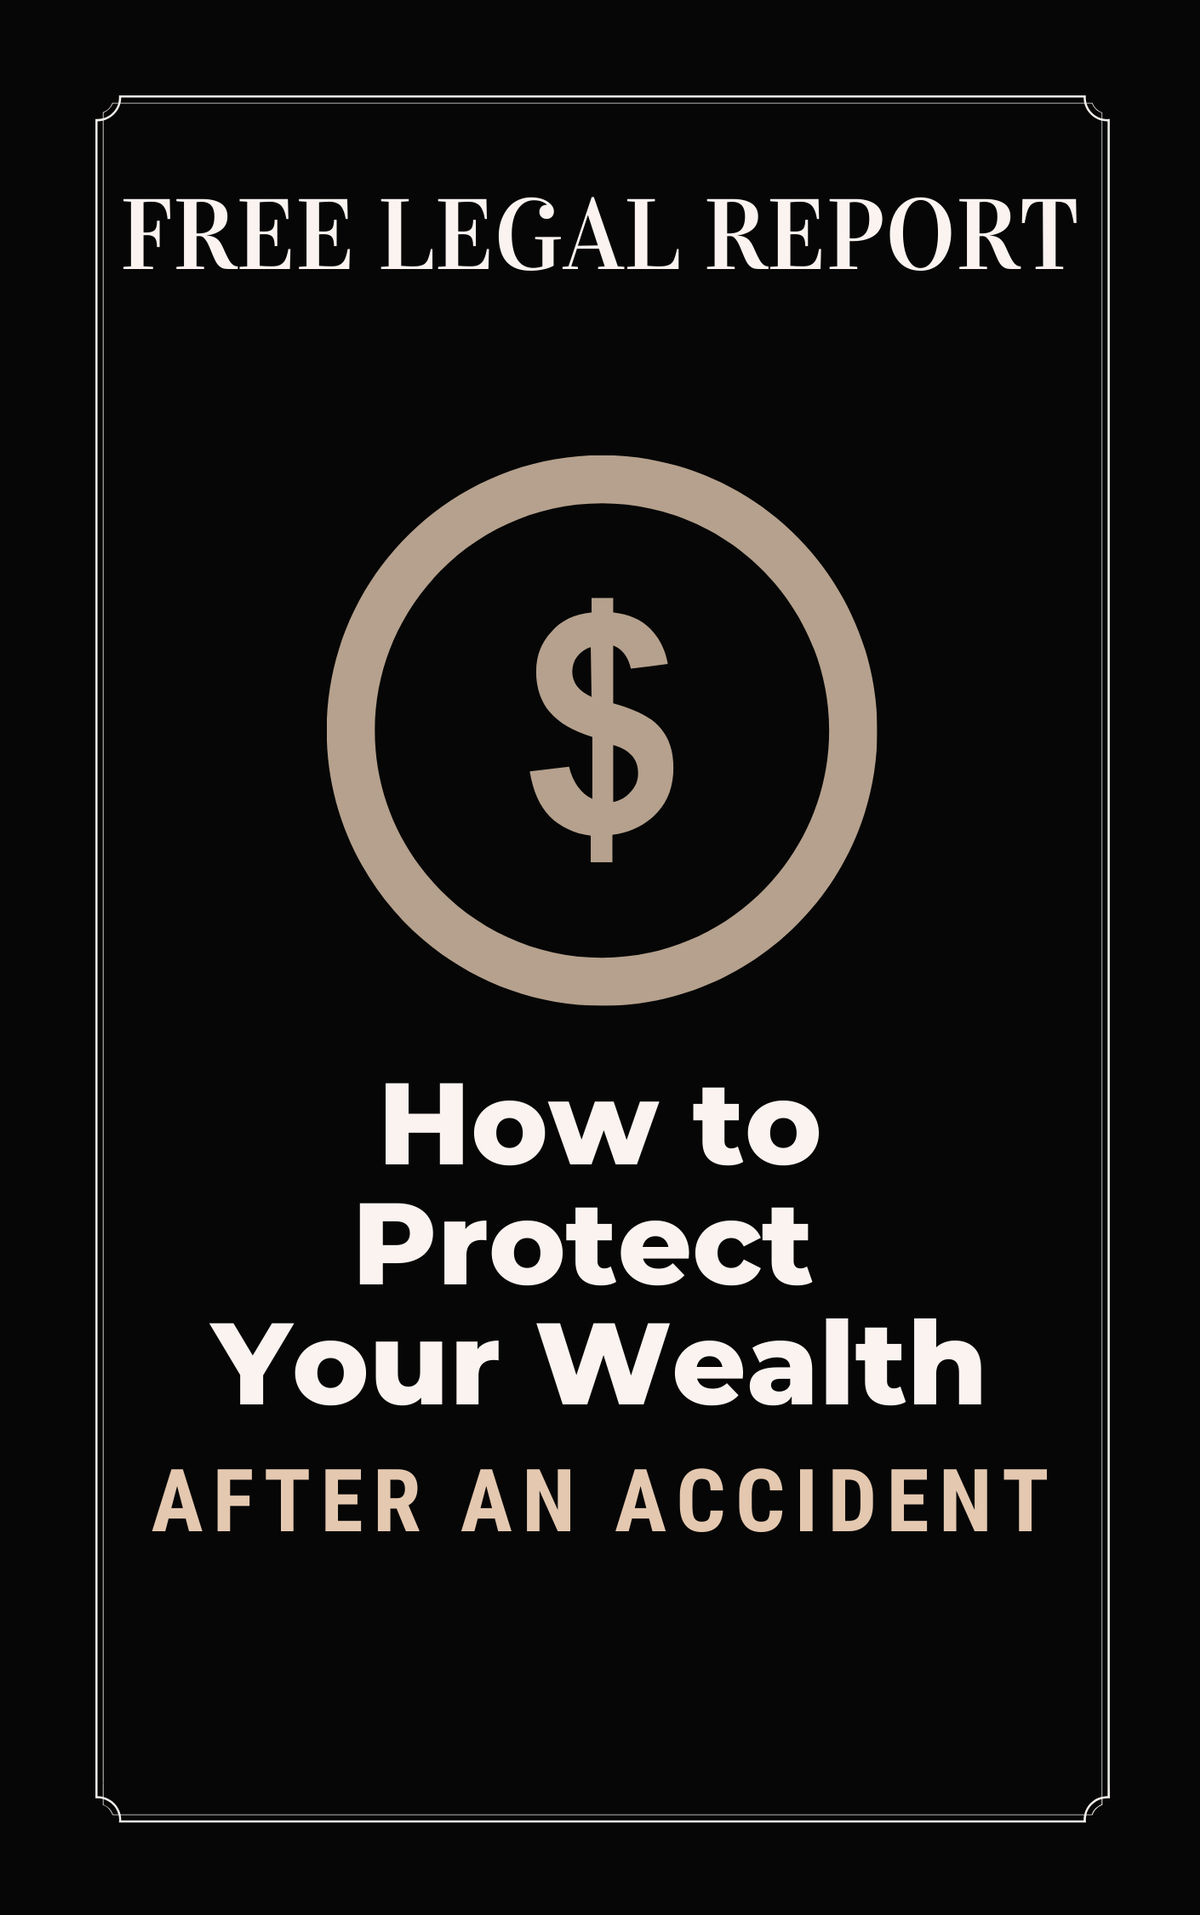 How to Protect Your Wealth After an Accident